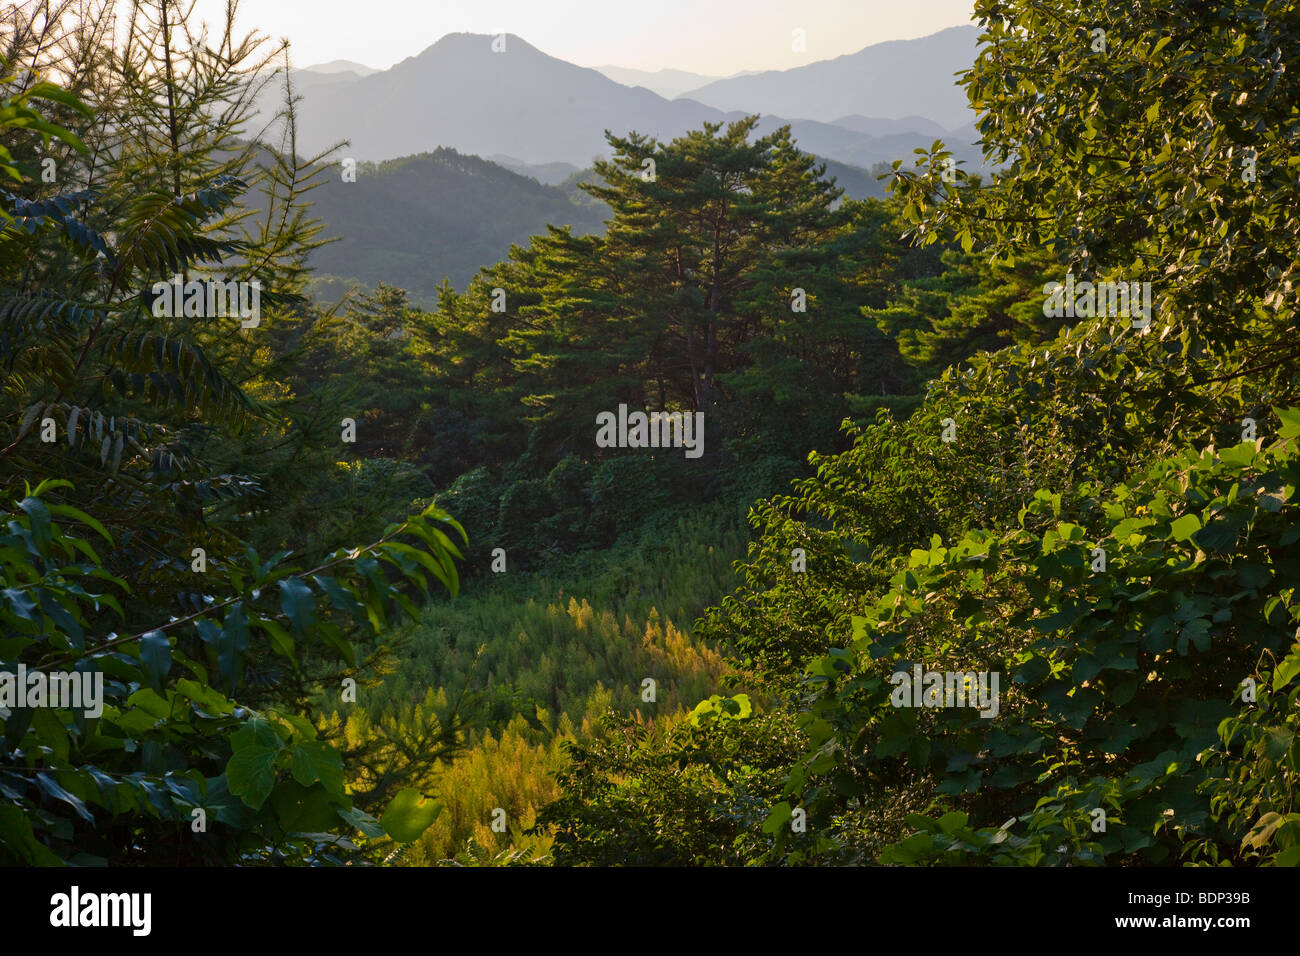 Layers of mountains in rural Chungbuk Province South Korea Stock Photo